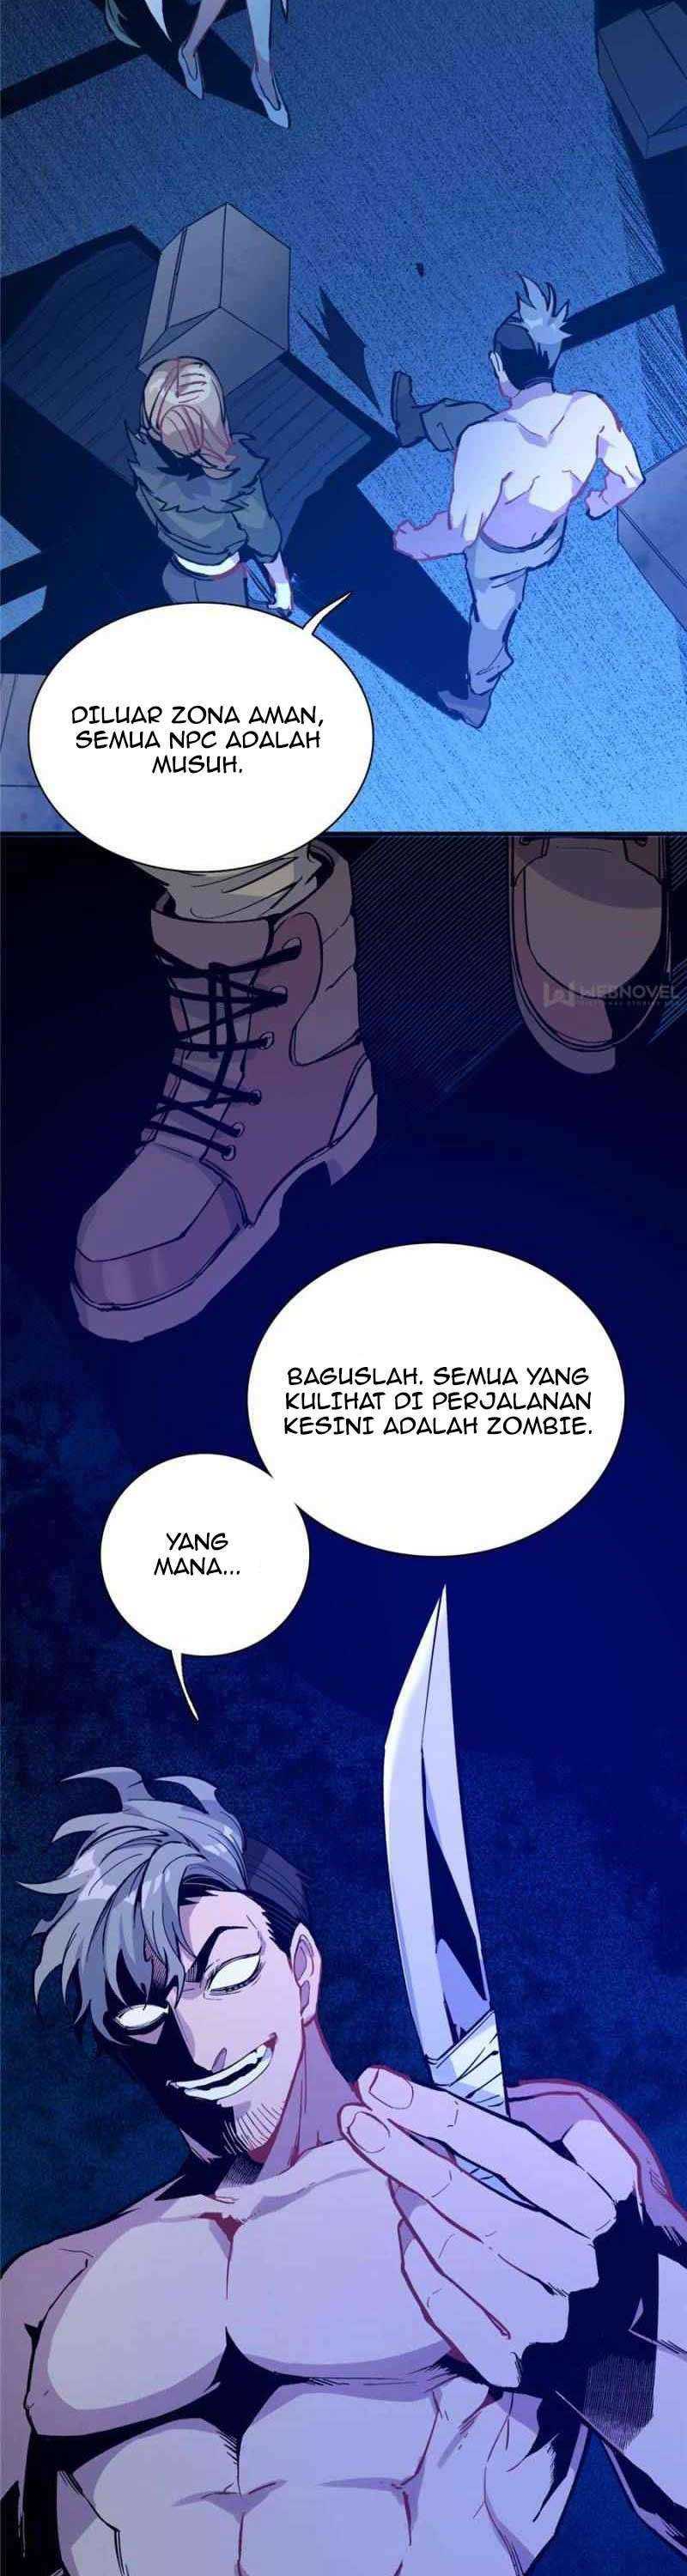 I’m a Monster Chapter 05